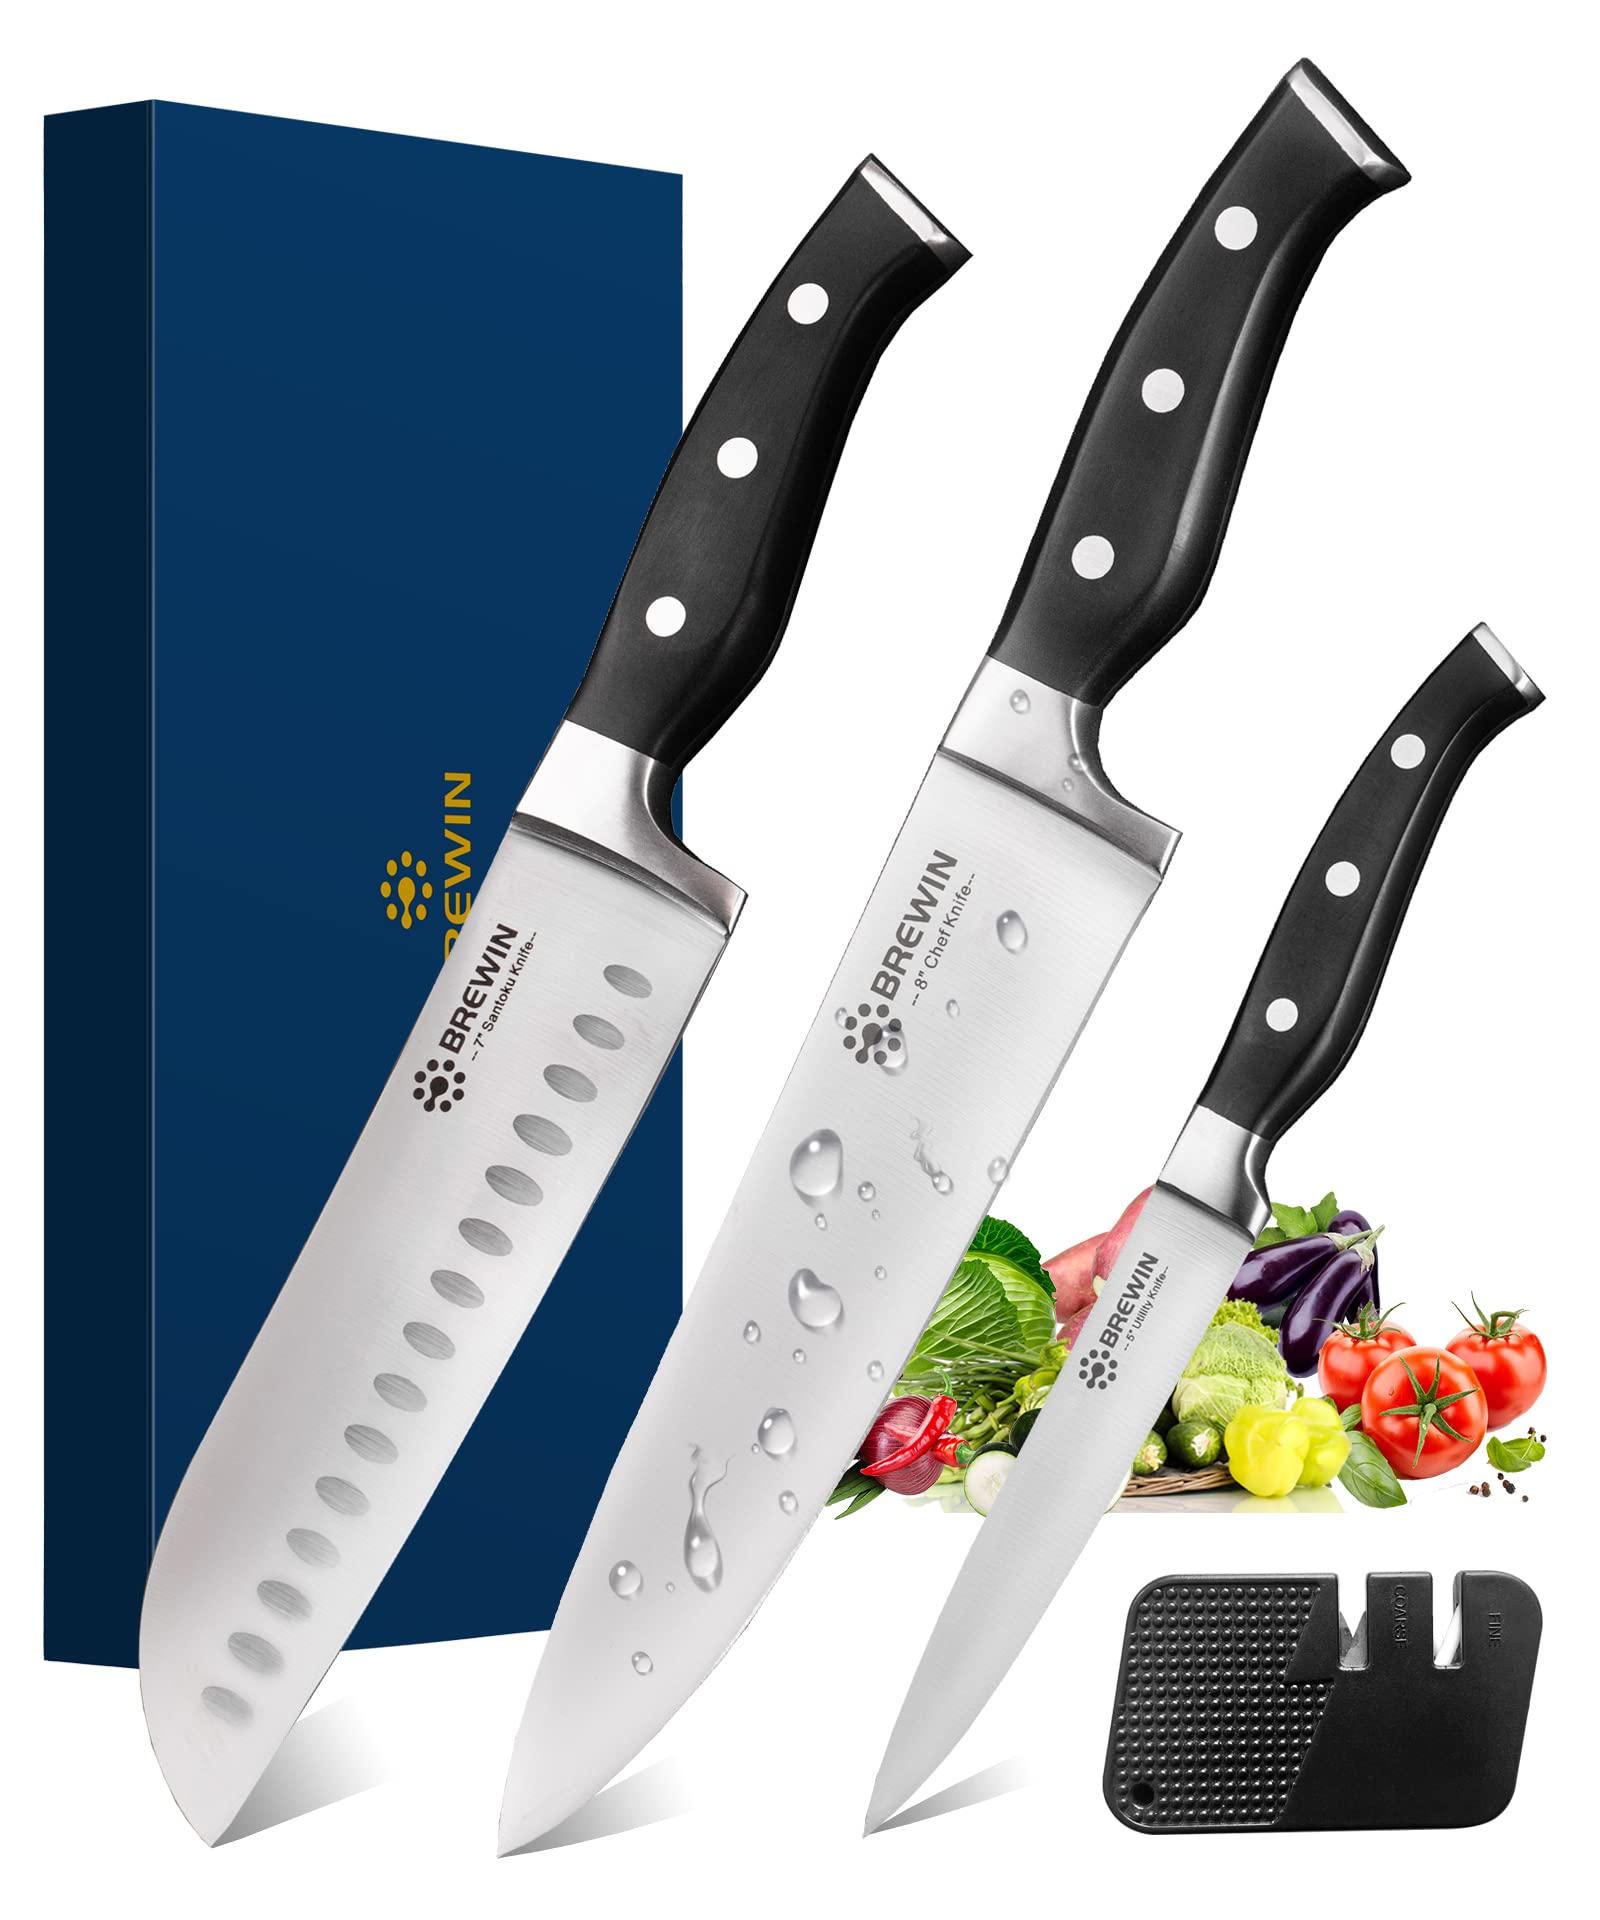 Brewin Professional chef Knife Set 3PcS, Ultra Sharp Knives Set for Kitchen High carbon Stainless Steel Kitchen Knife Sets Full